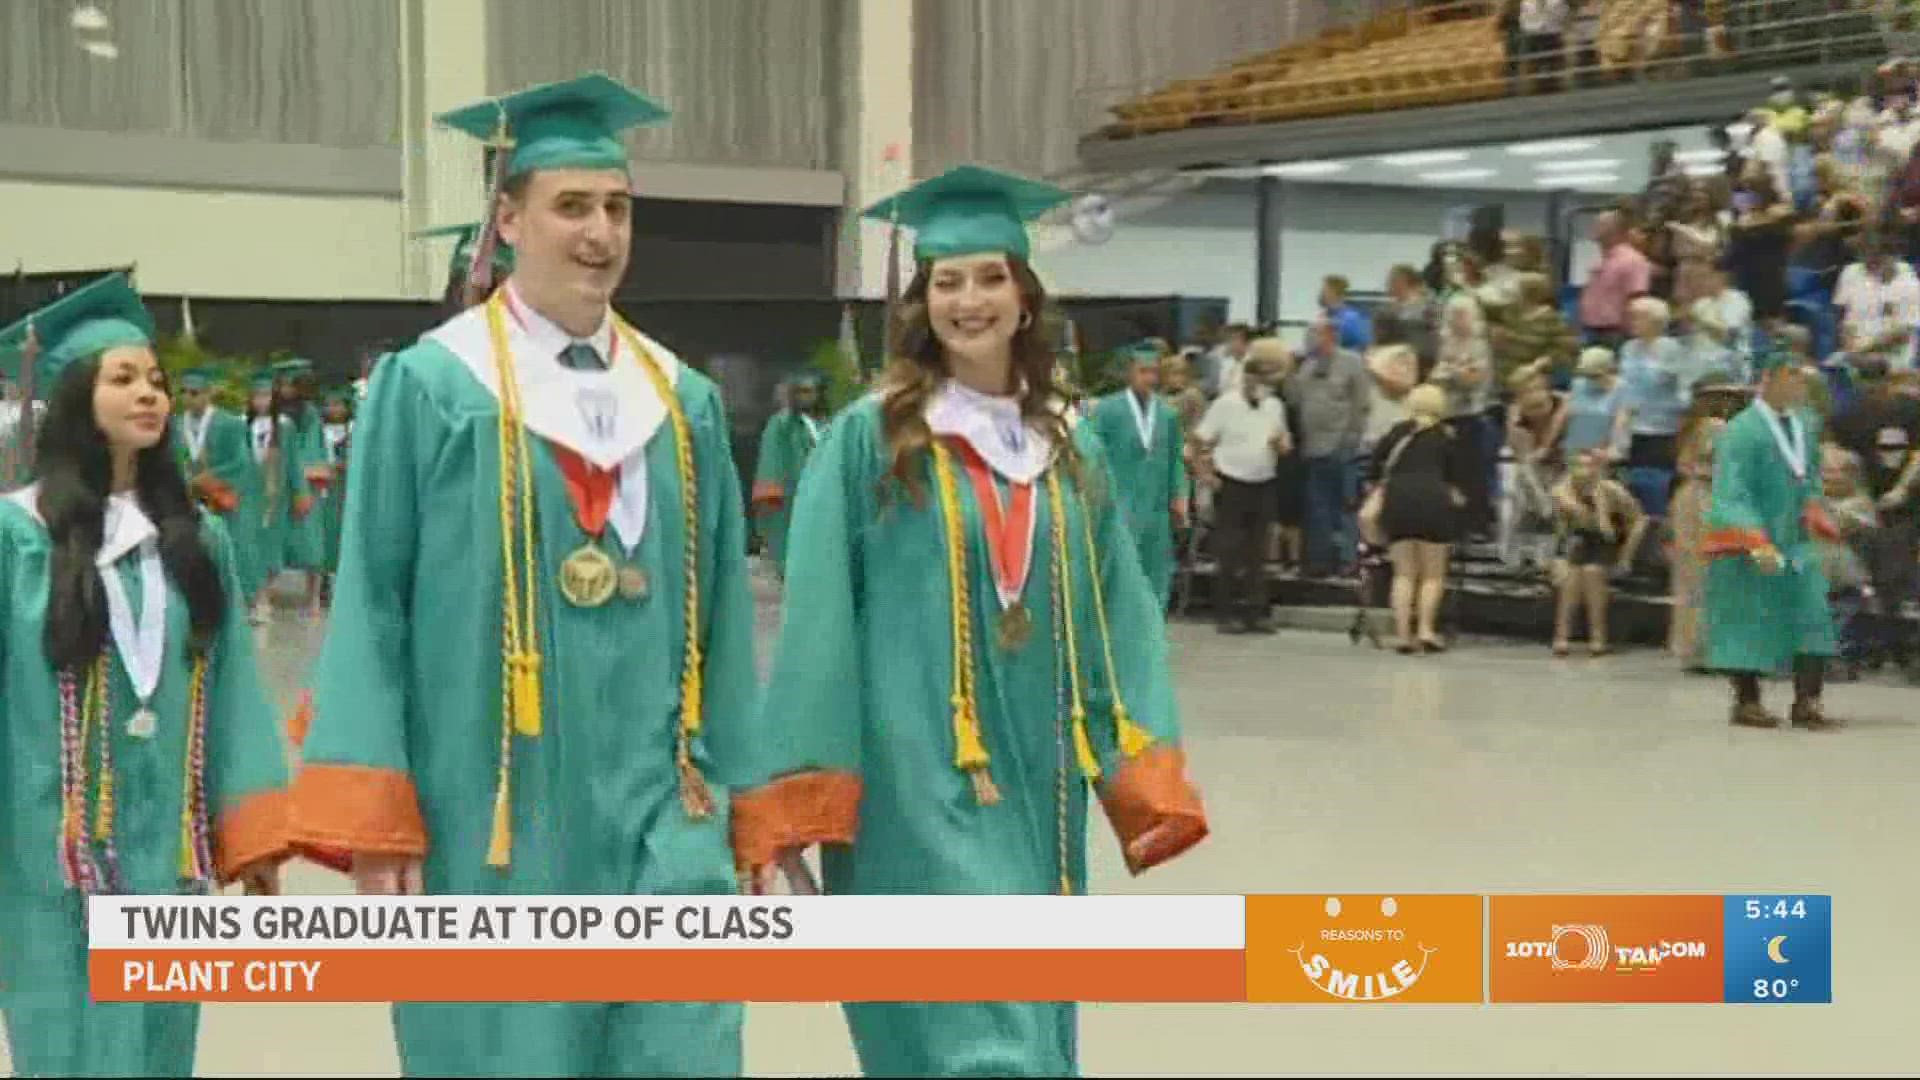 Bailey and Drew Blanton were named salutatorian and valedictorian, respectively.